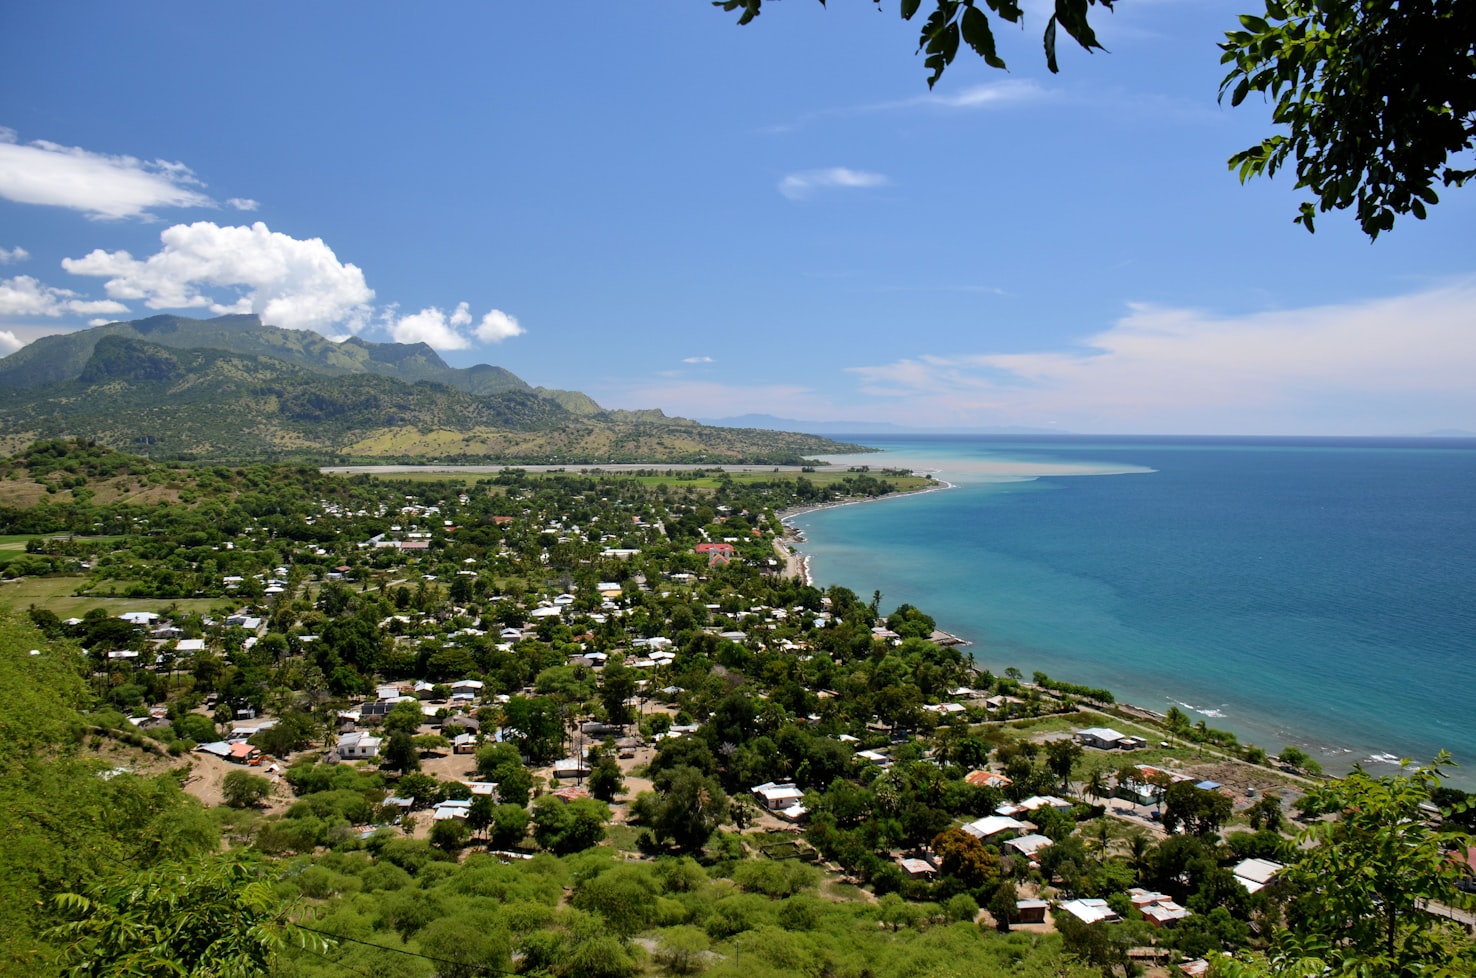 Timor-Leste (East Timor) Travel Guide - Attractions, What to See, Do, Costs, FAQs